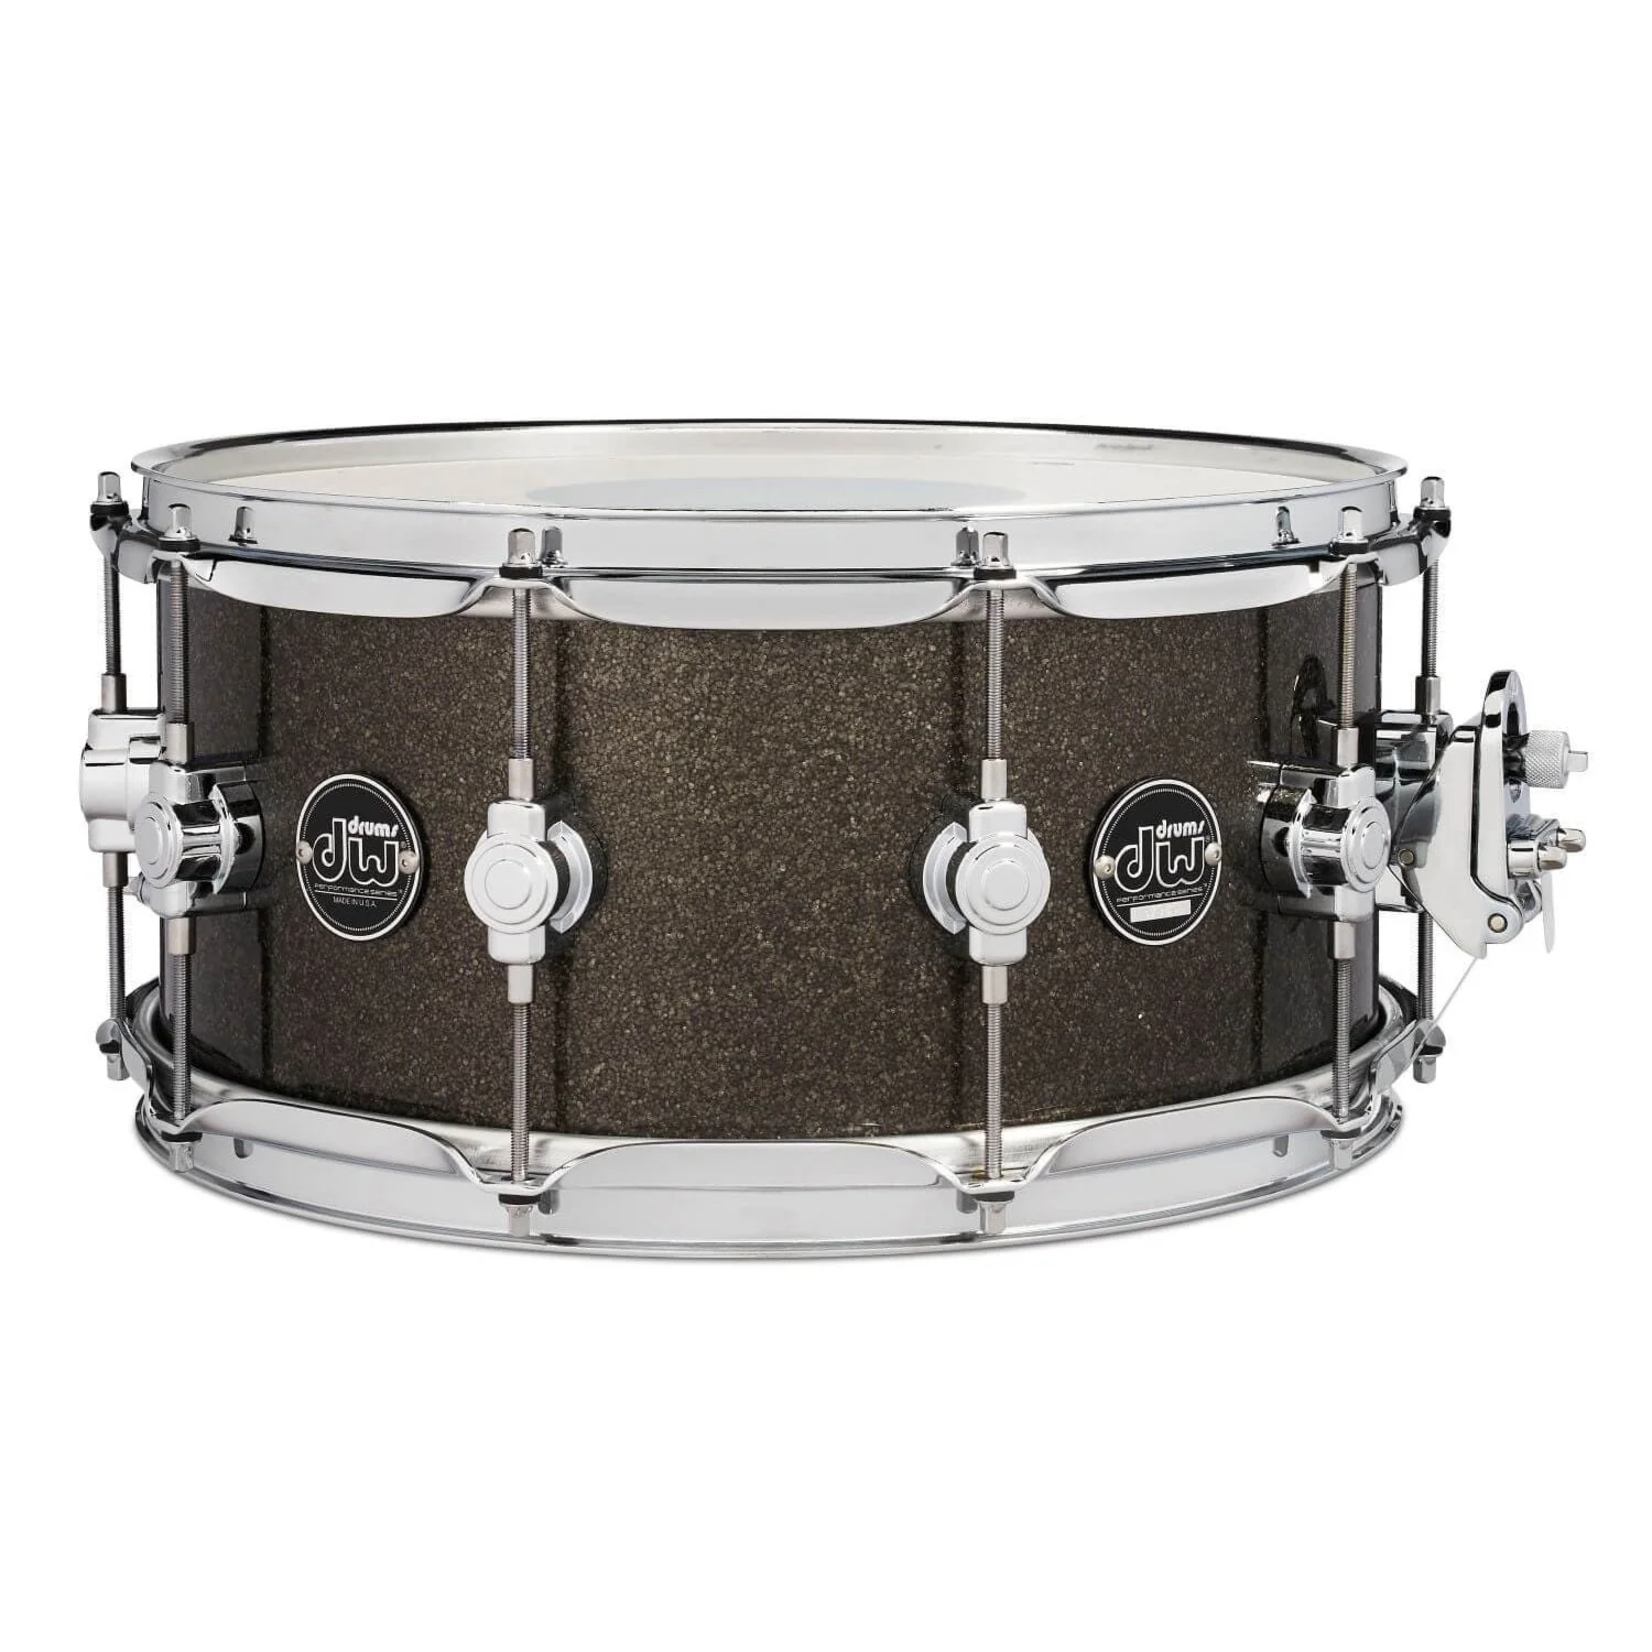 DW DW Performance Series 6.5x14" Snare Drum (Pewter Sparkle) DRP#6514SSPS